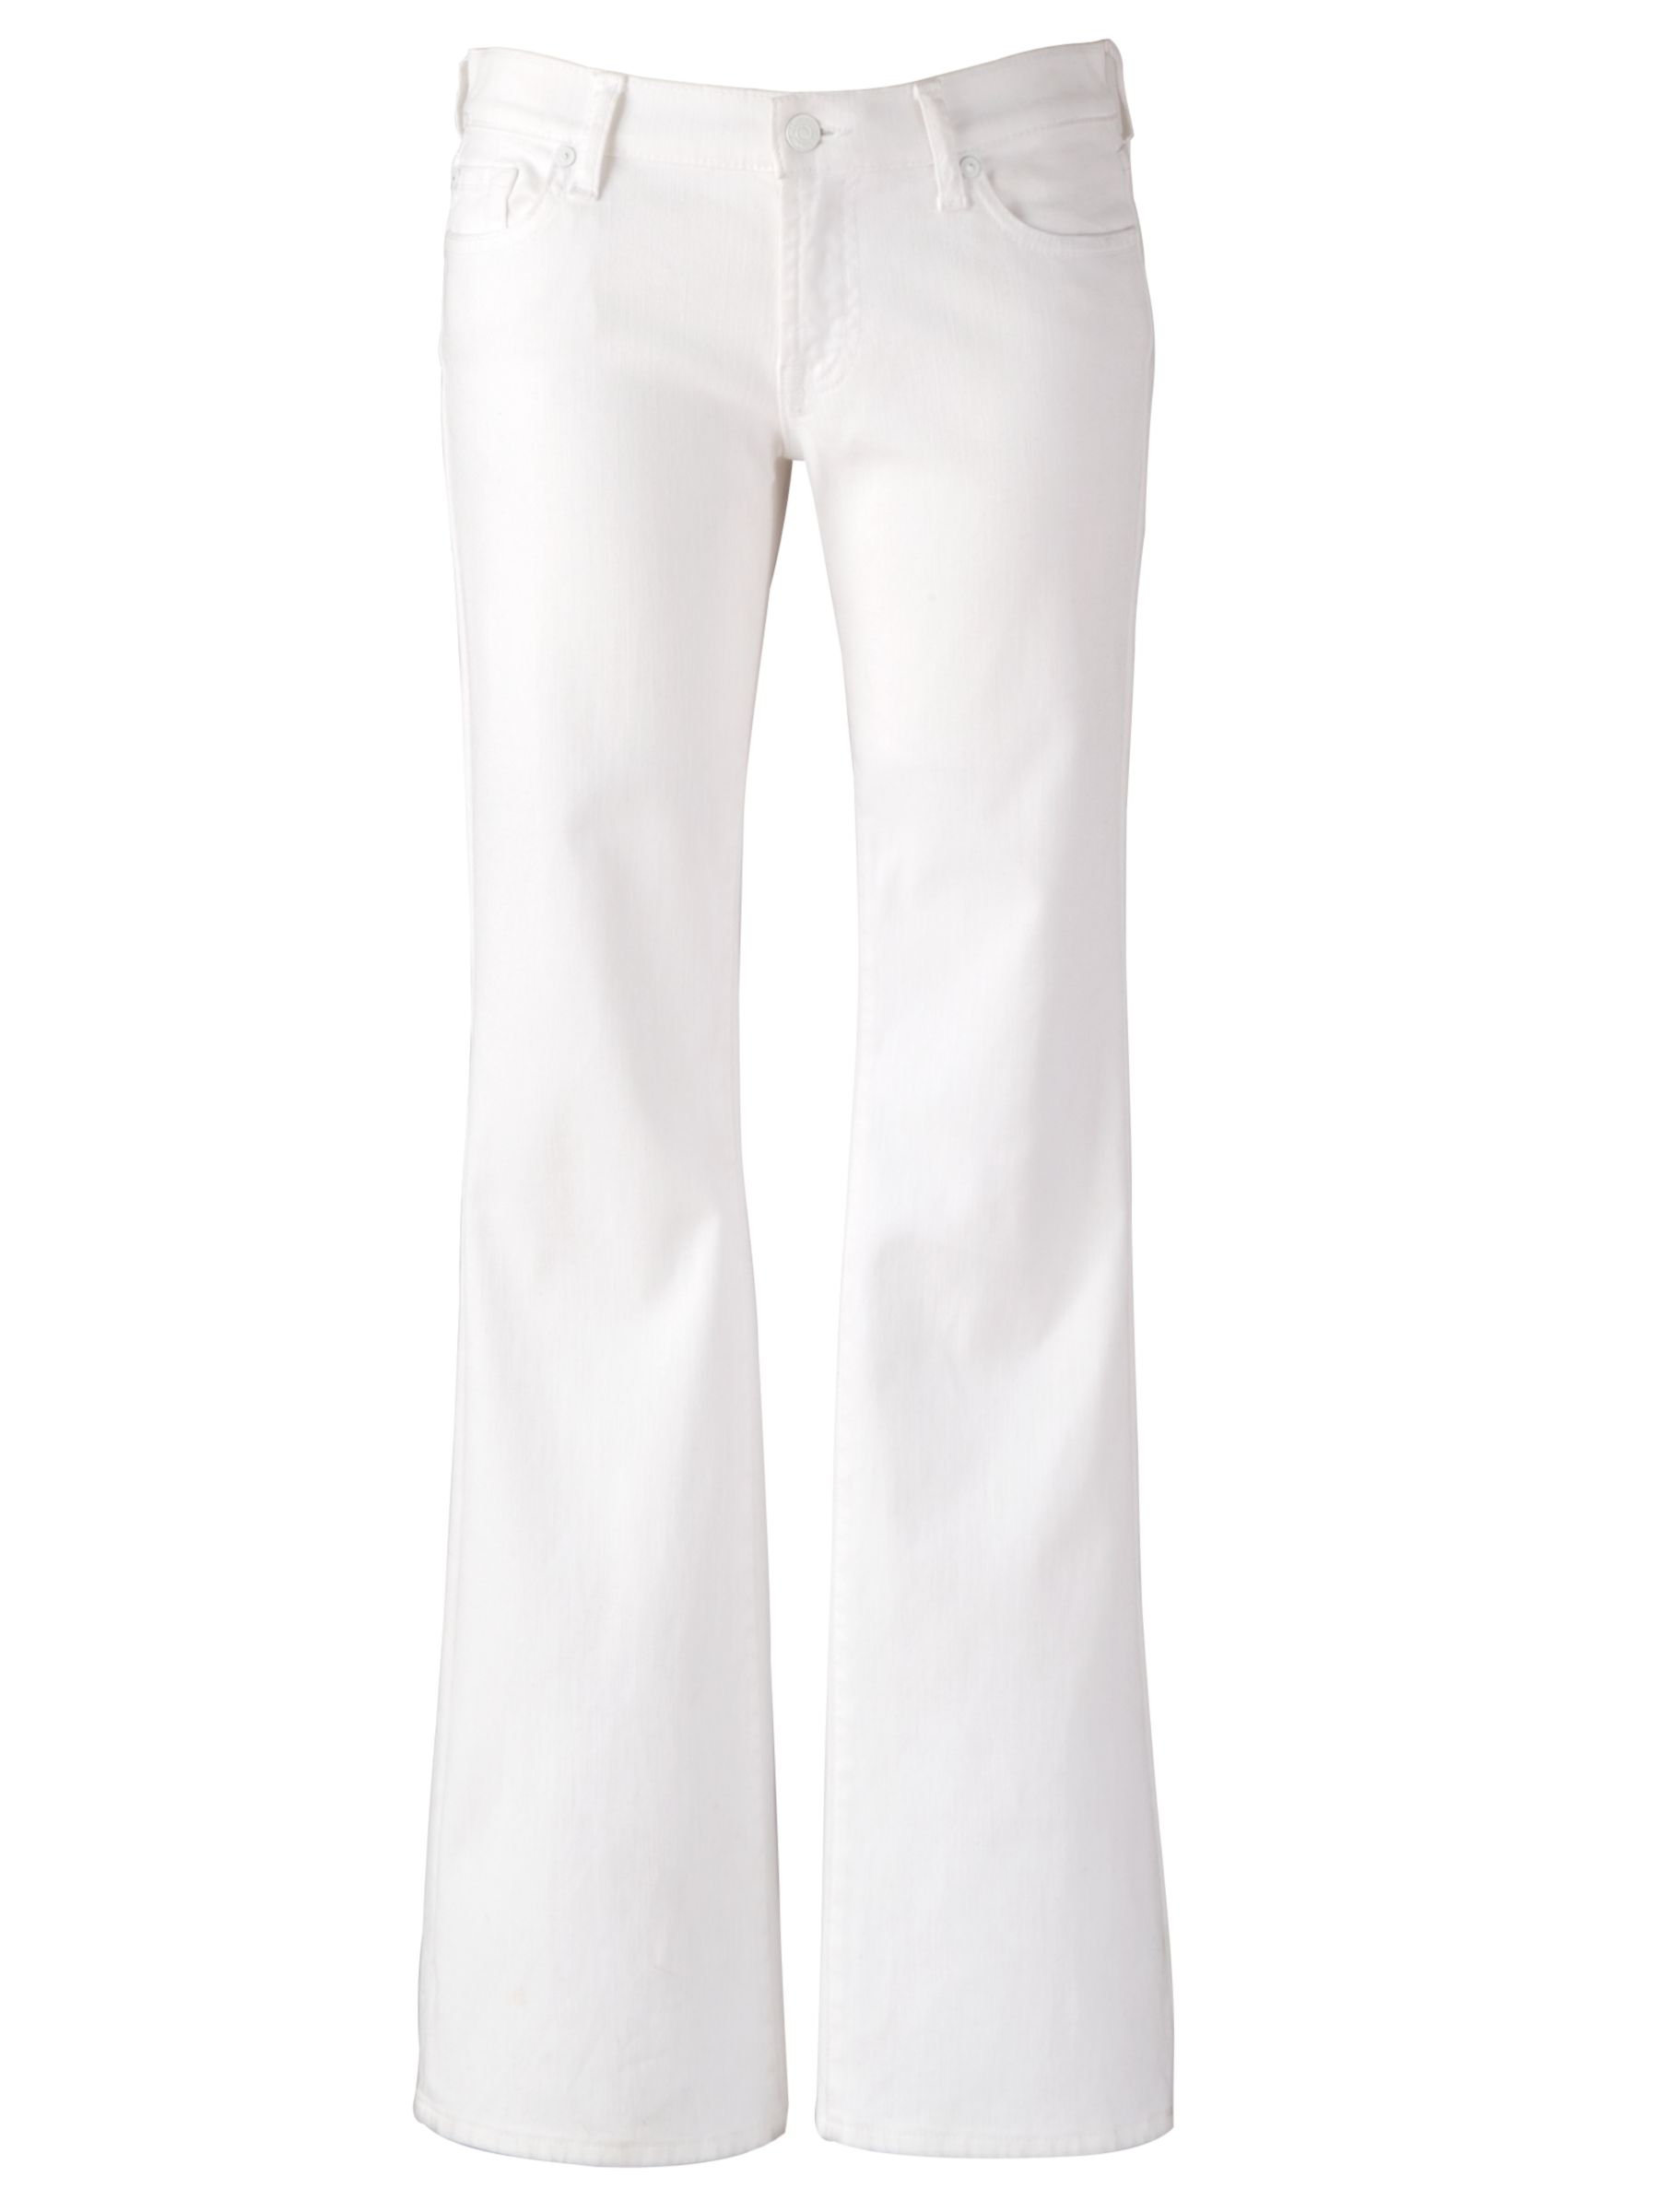 7 For All Mankind Mid Rise Bootcut Jeans, White at John Lewis